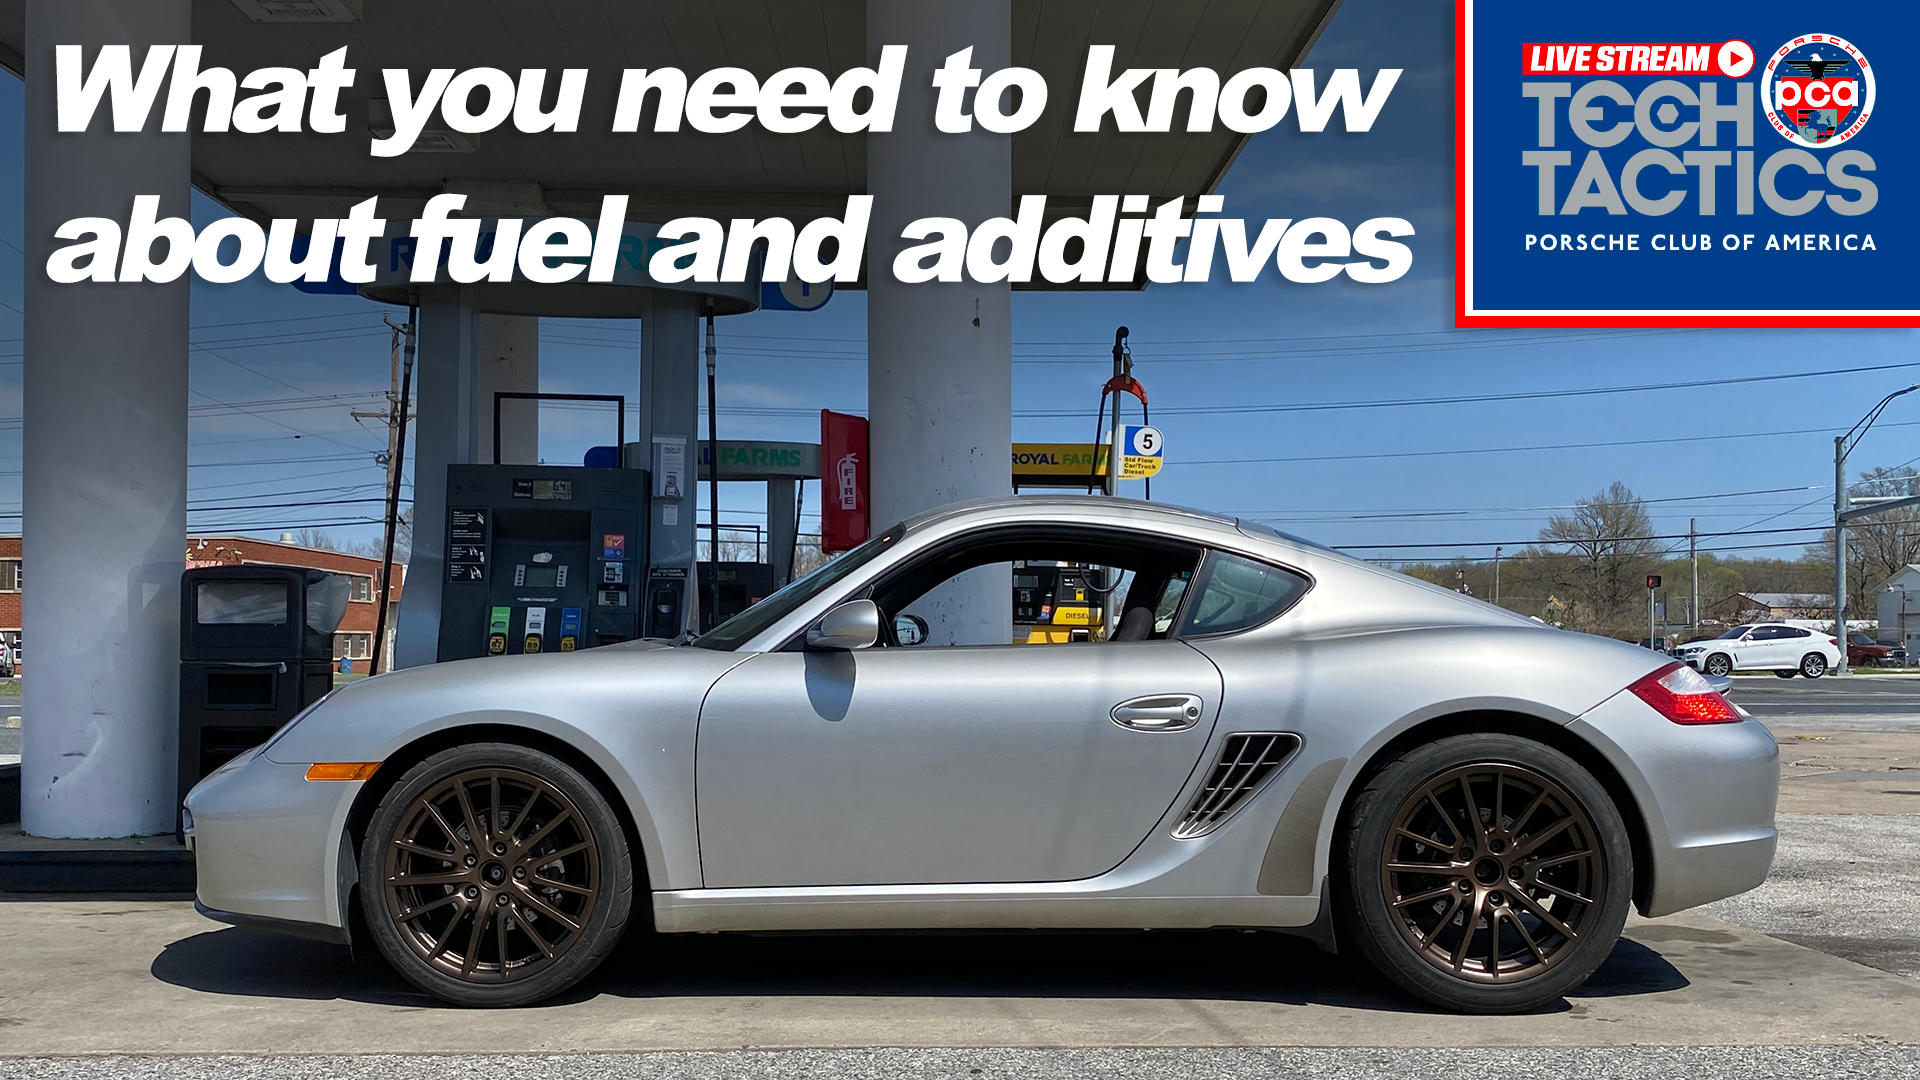 Porsche Club of America - What you need to know about fuel and additives | Tech Tactics Live